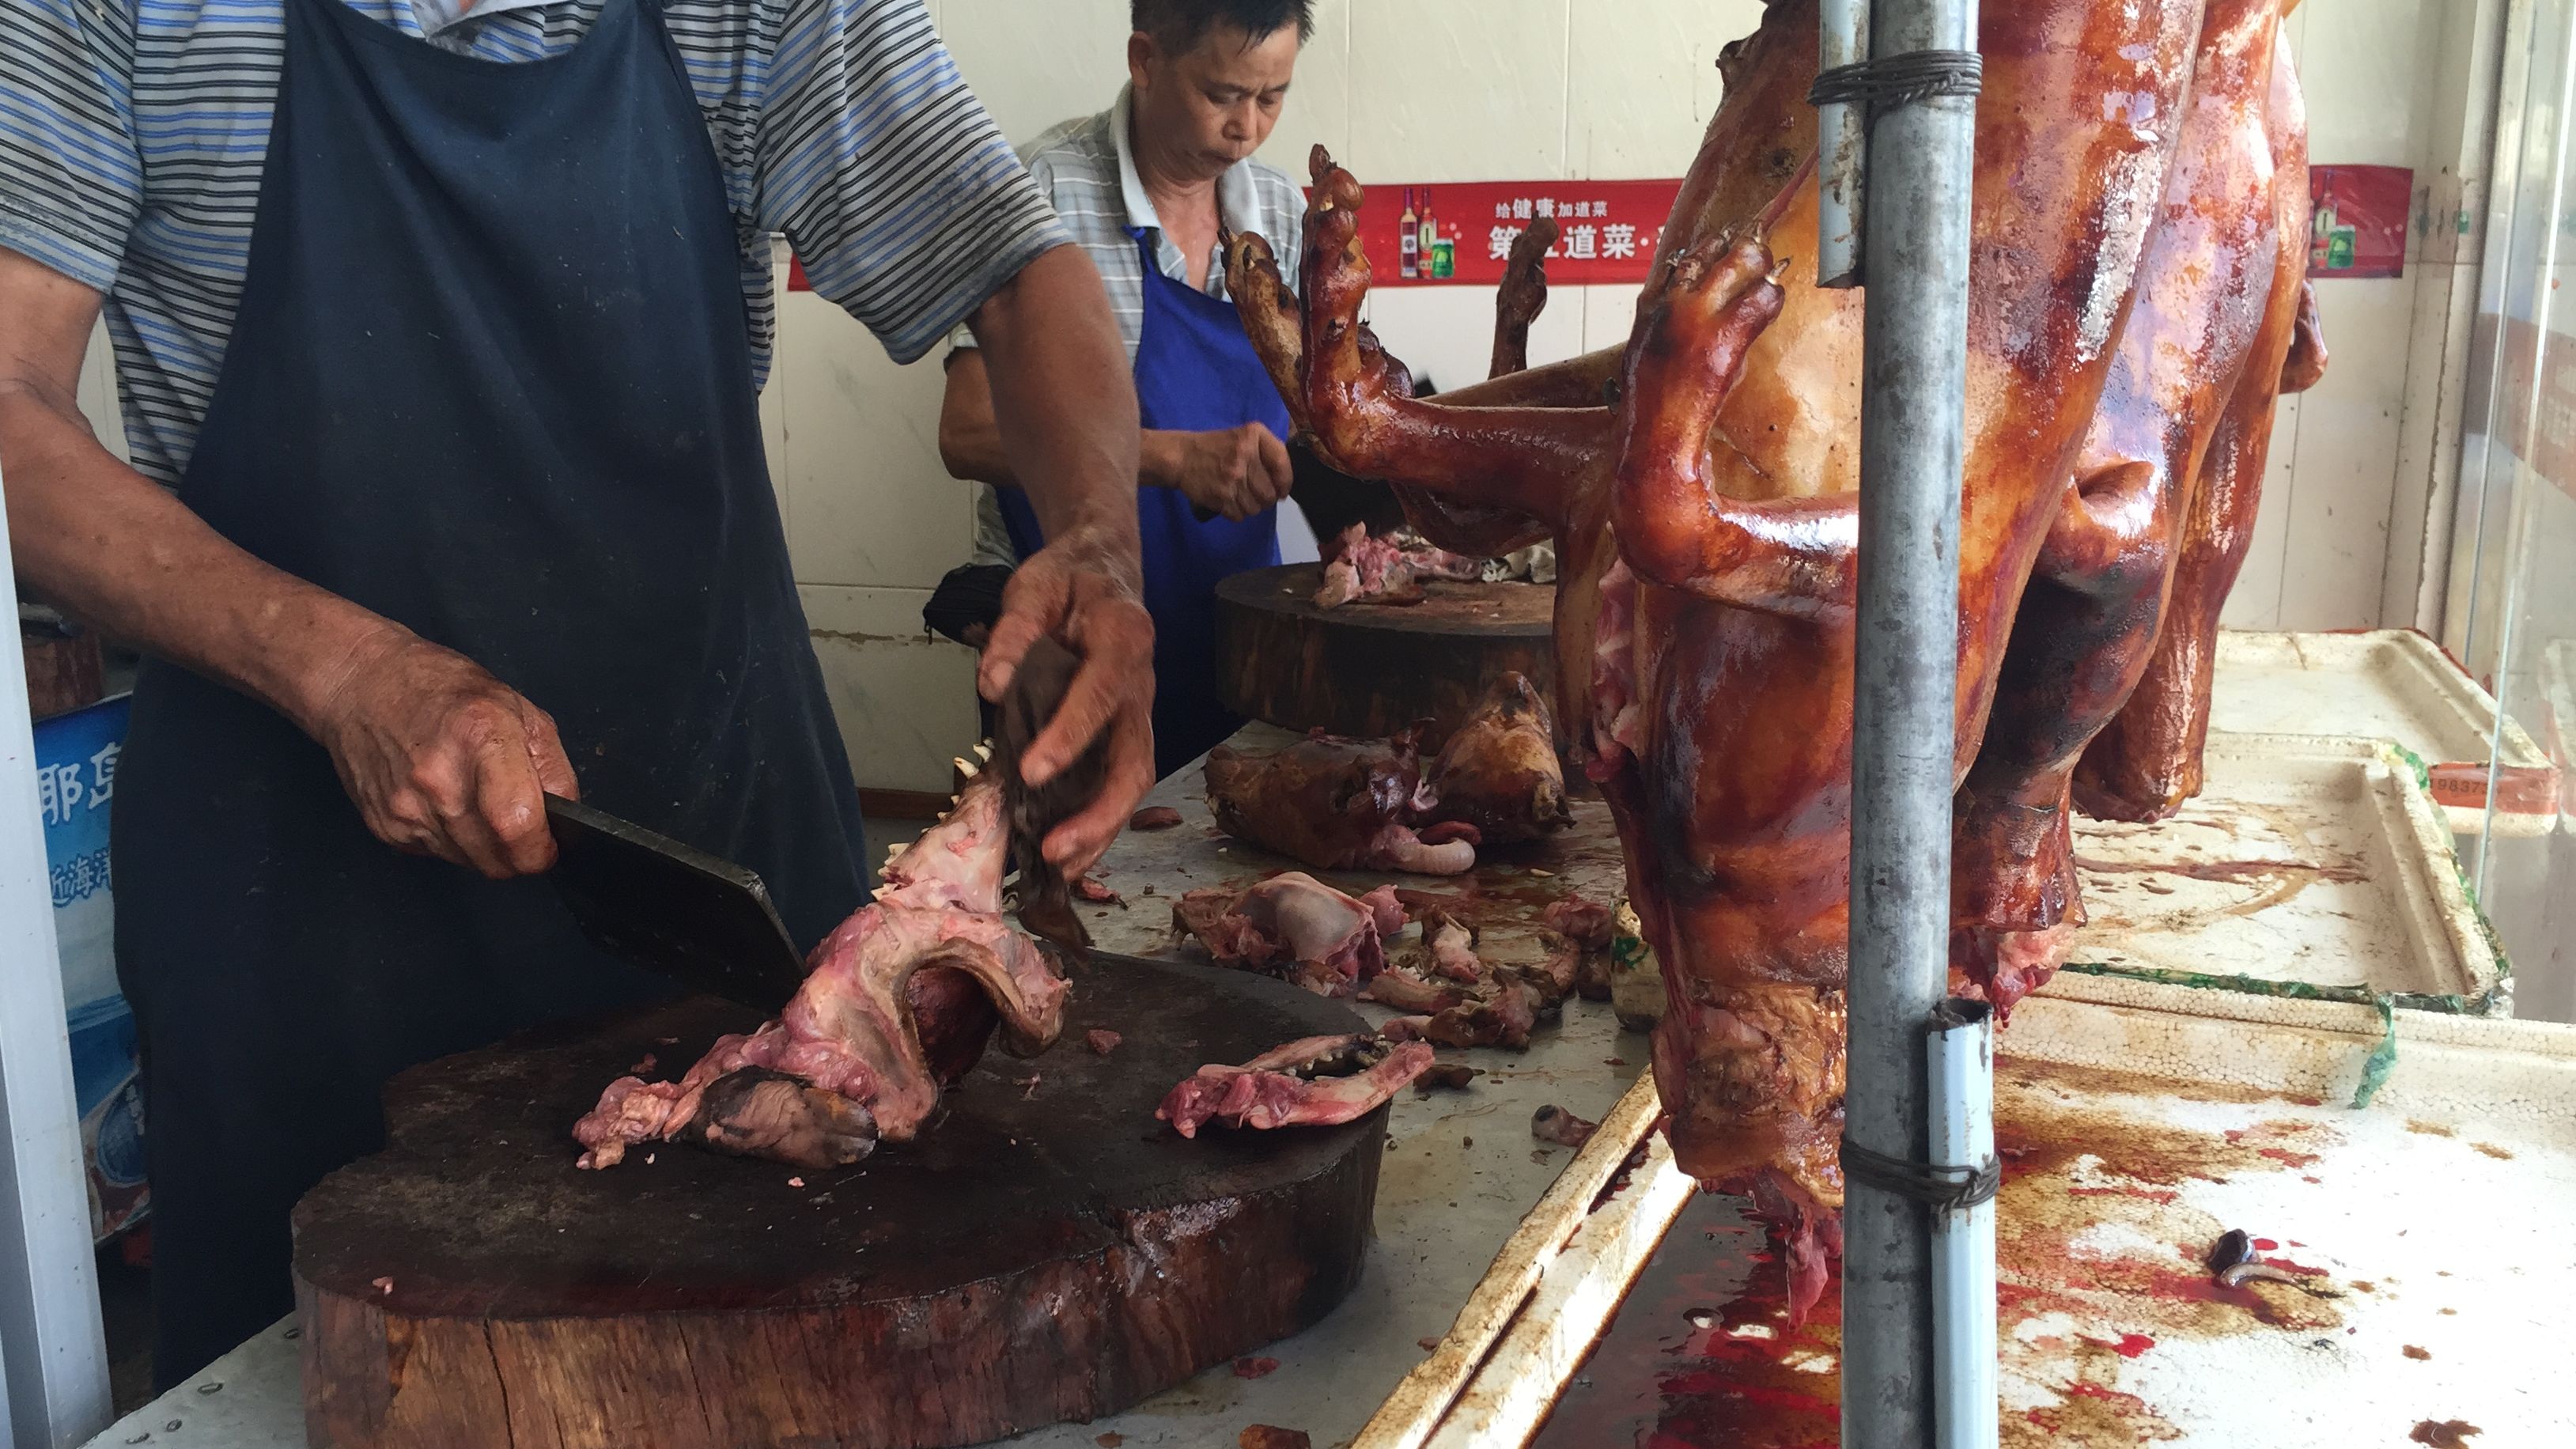 A man chops up dog meat a restaurant in Yulin, Sunday June 21, 2015.